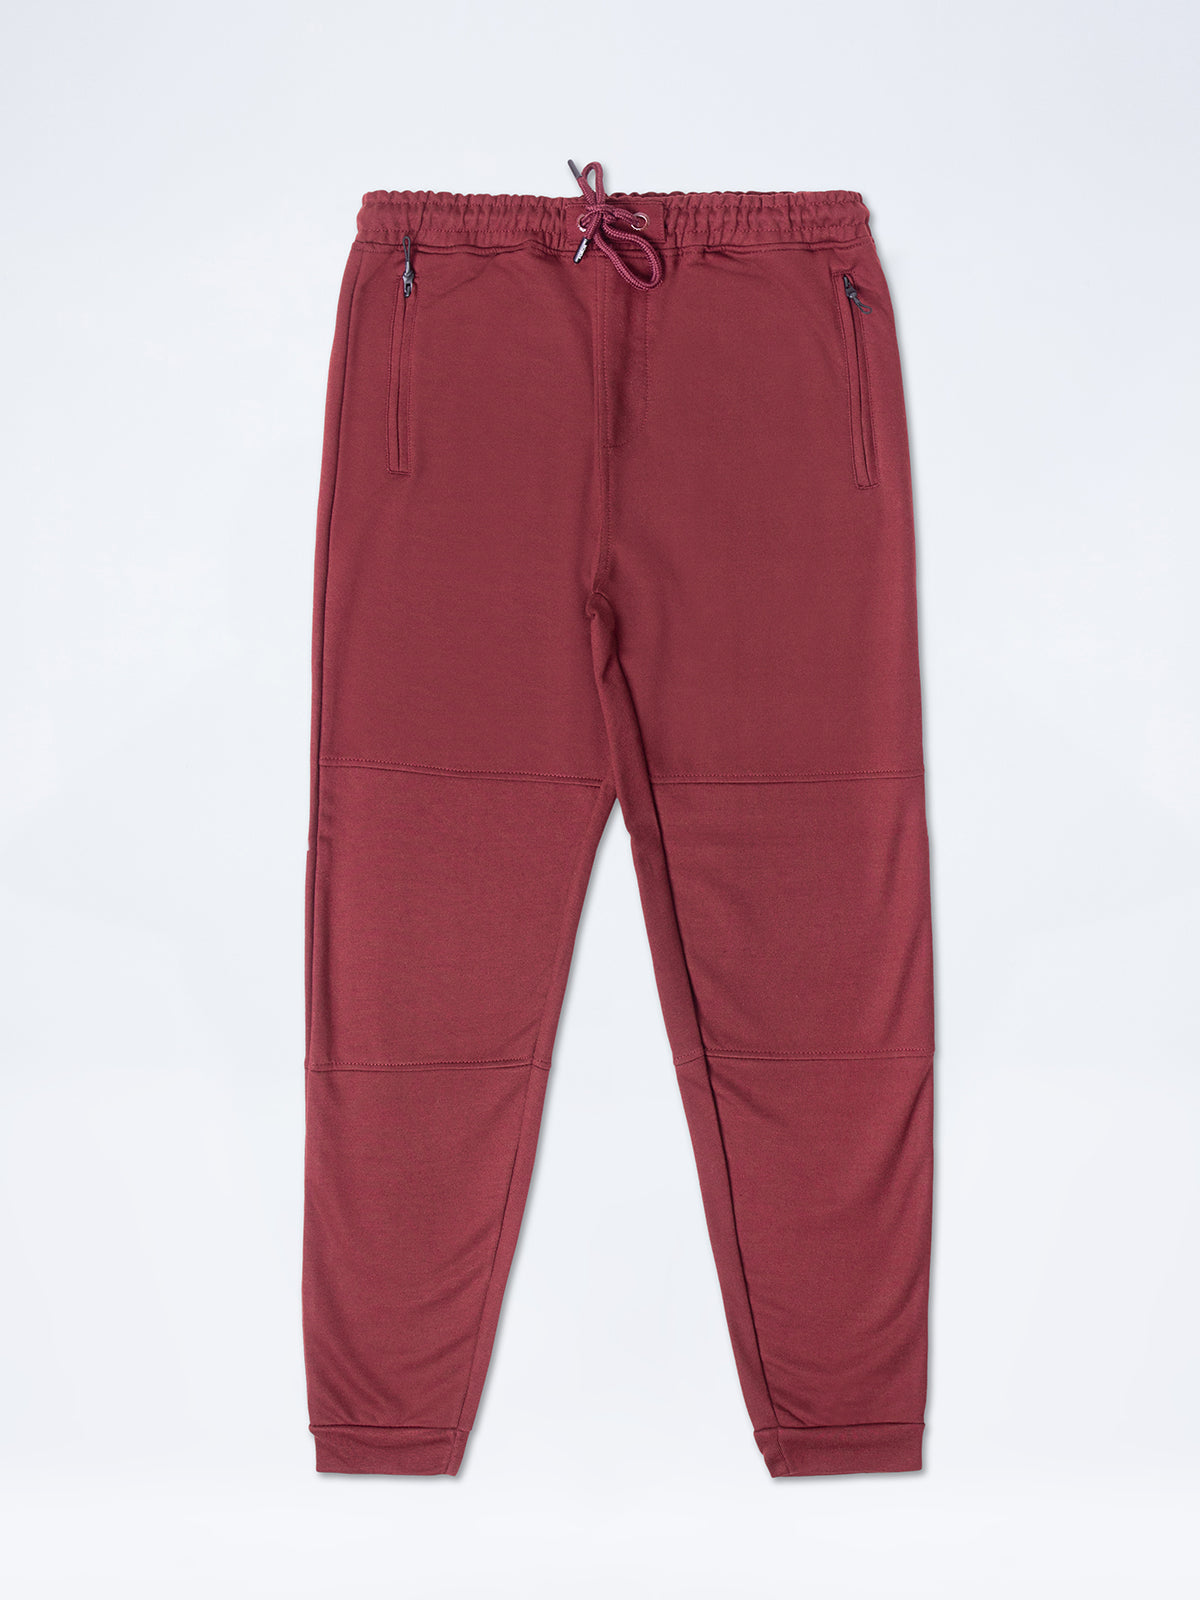 French Terry Jog Pant - FMBT24-003